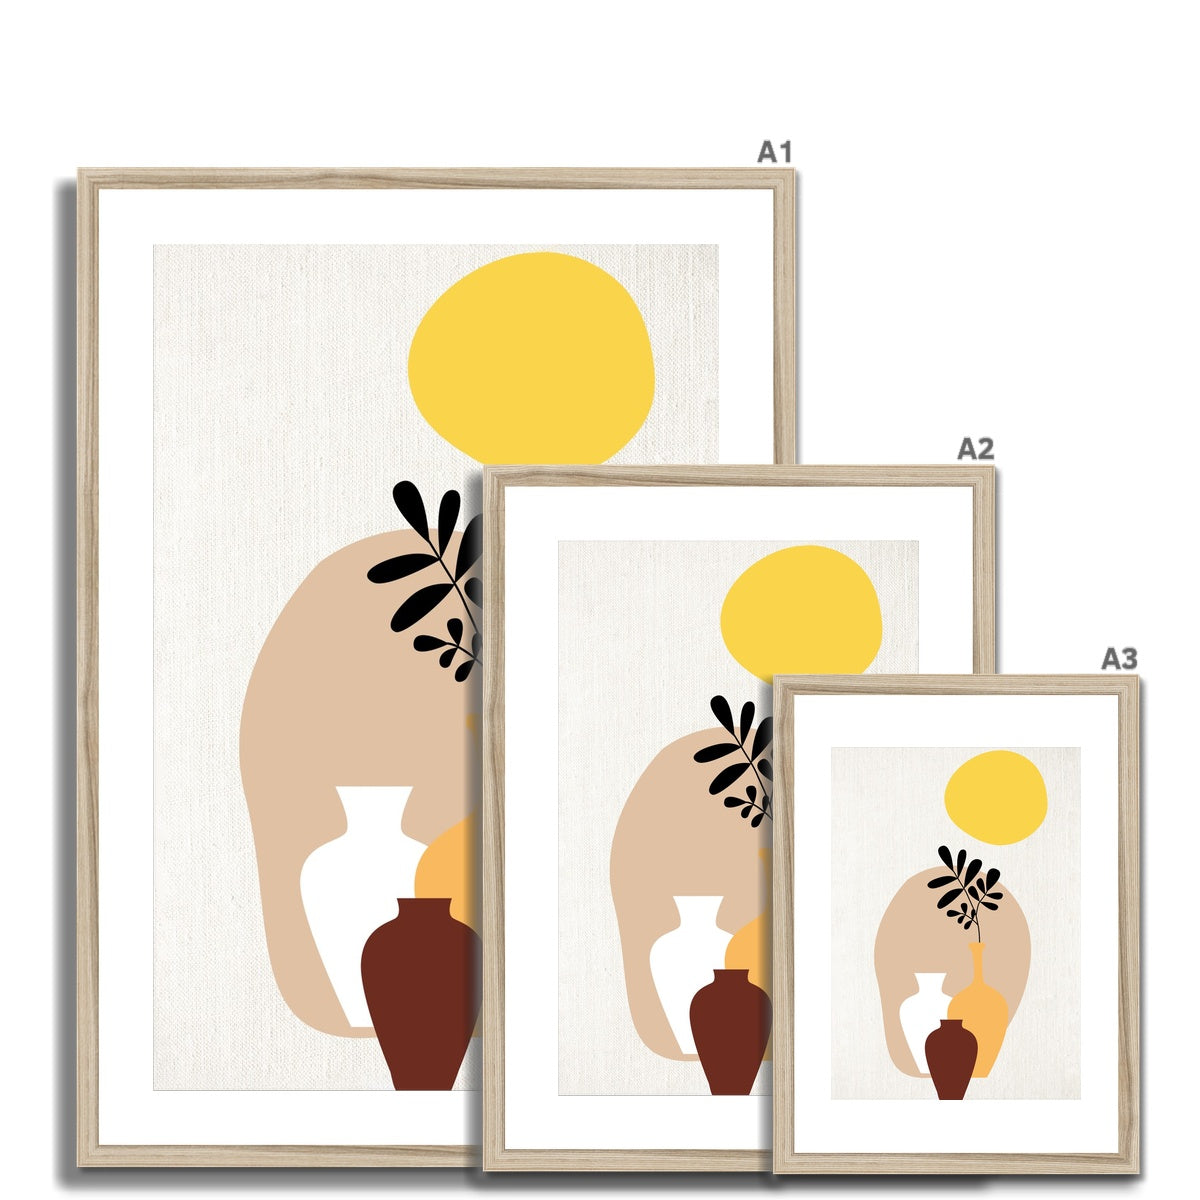 Vases and Sun Framed & Mounted Print